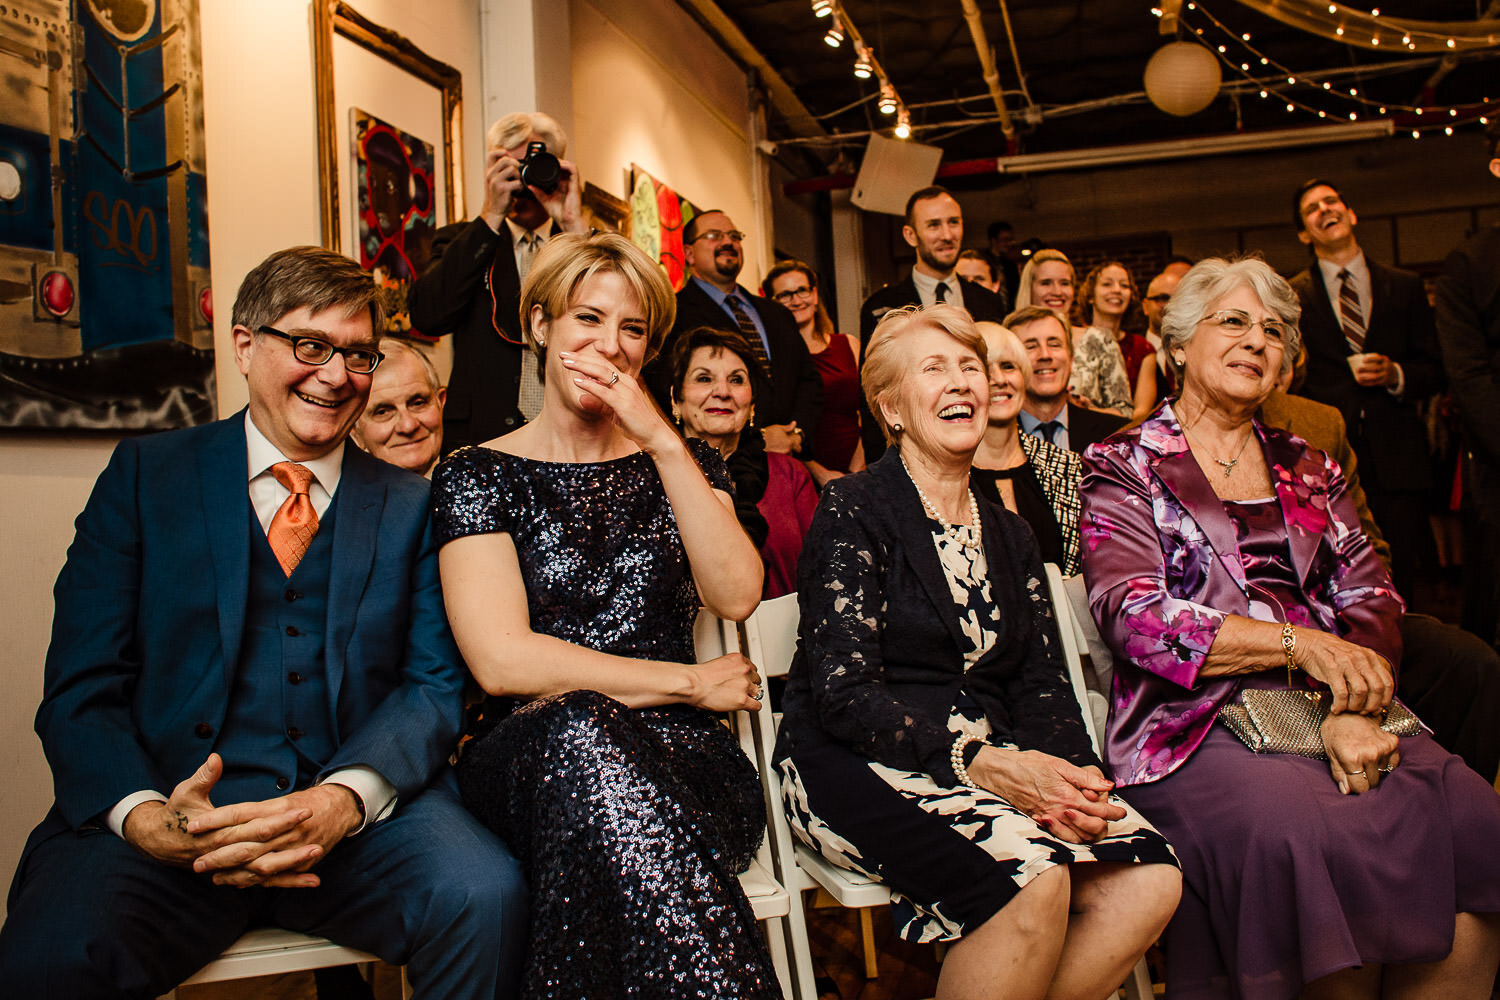 Parents reaction during ceremony at Aurora Gallery in Long Island City